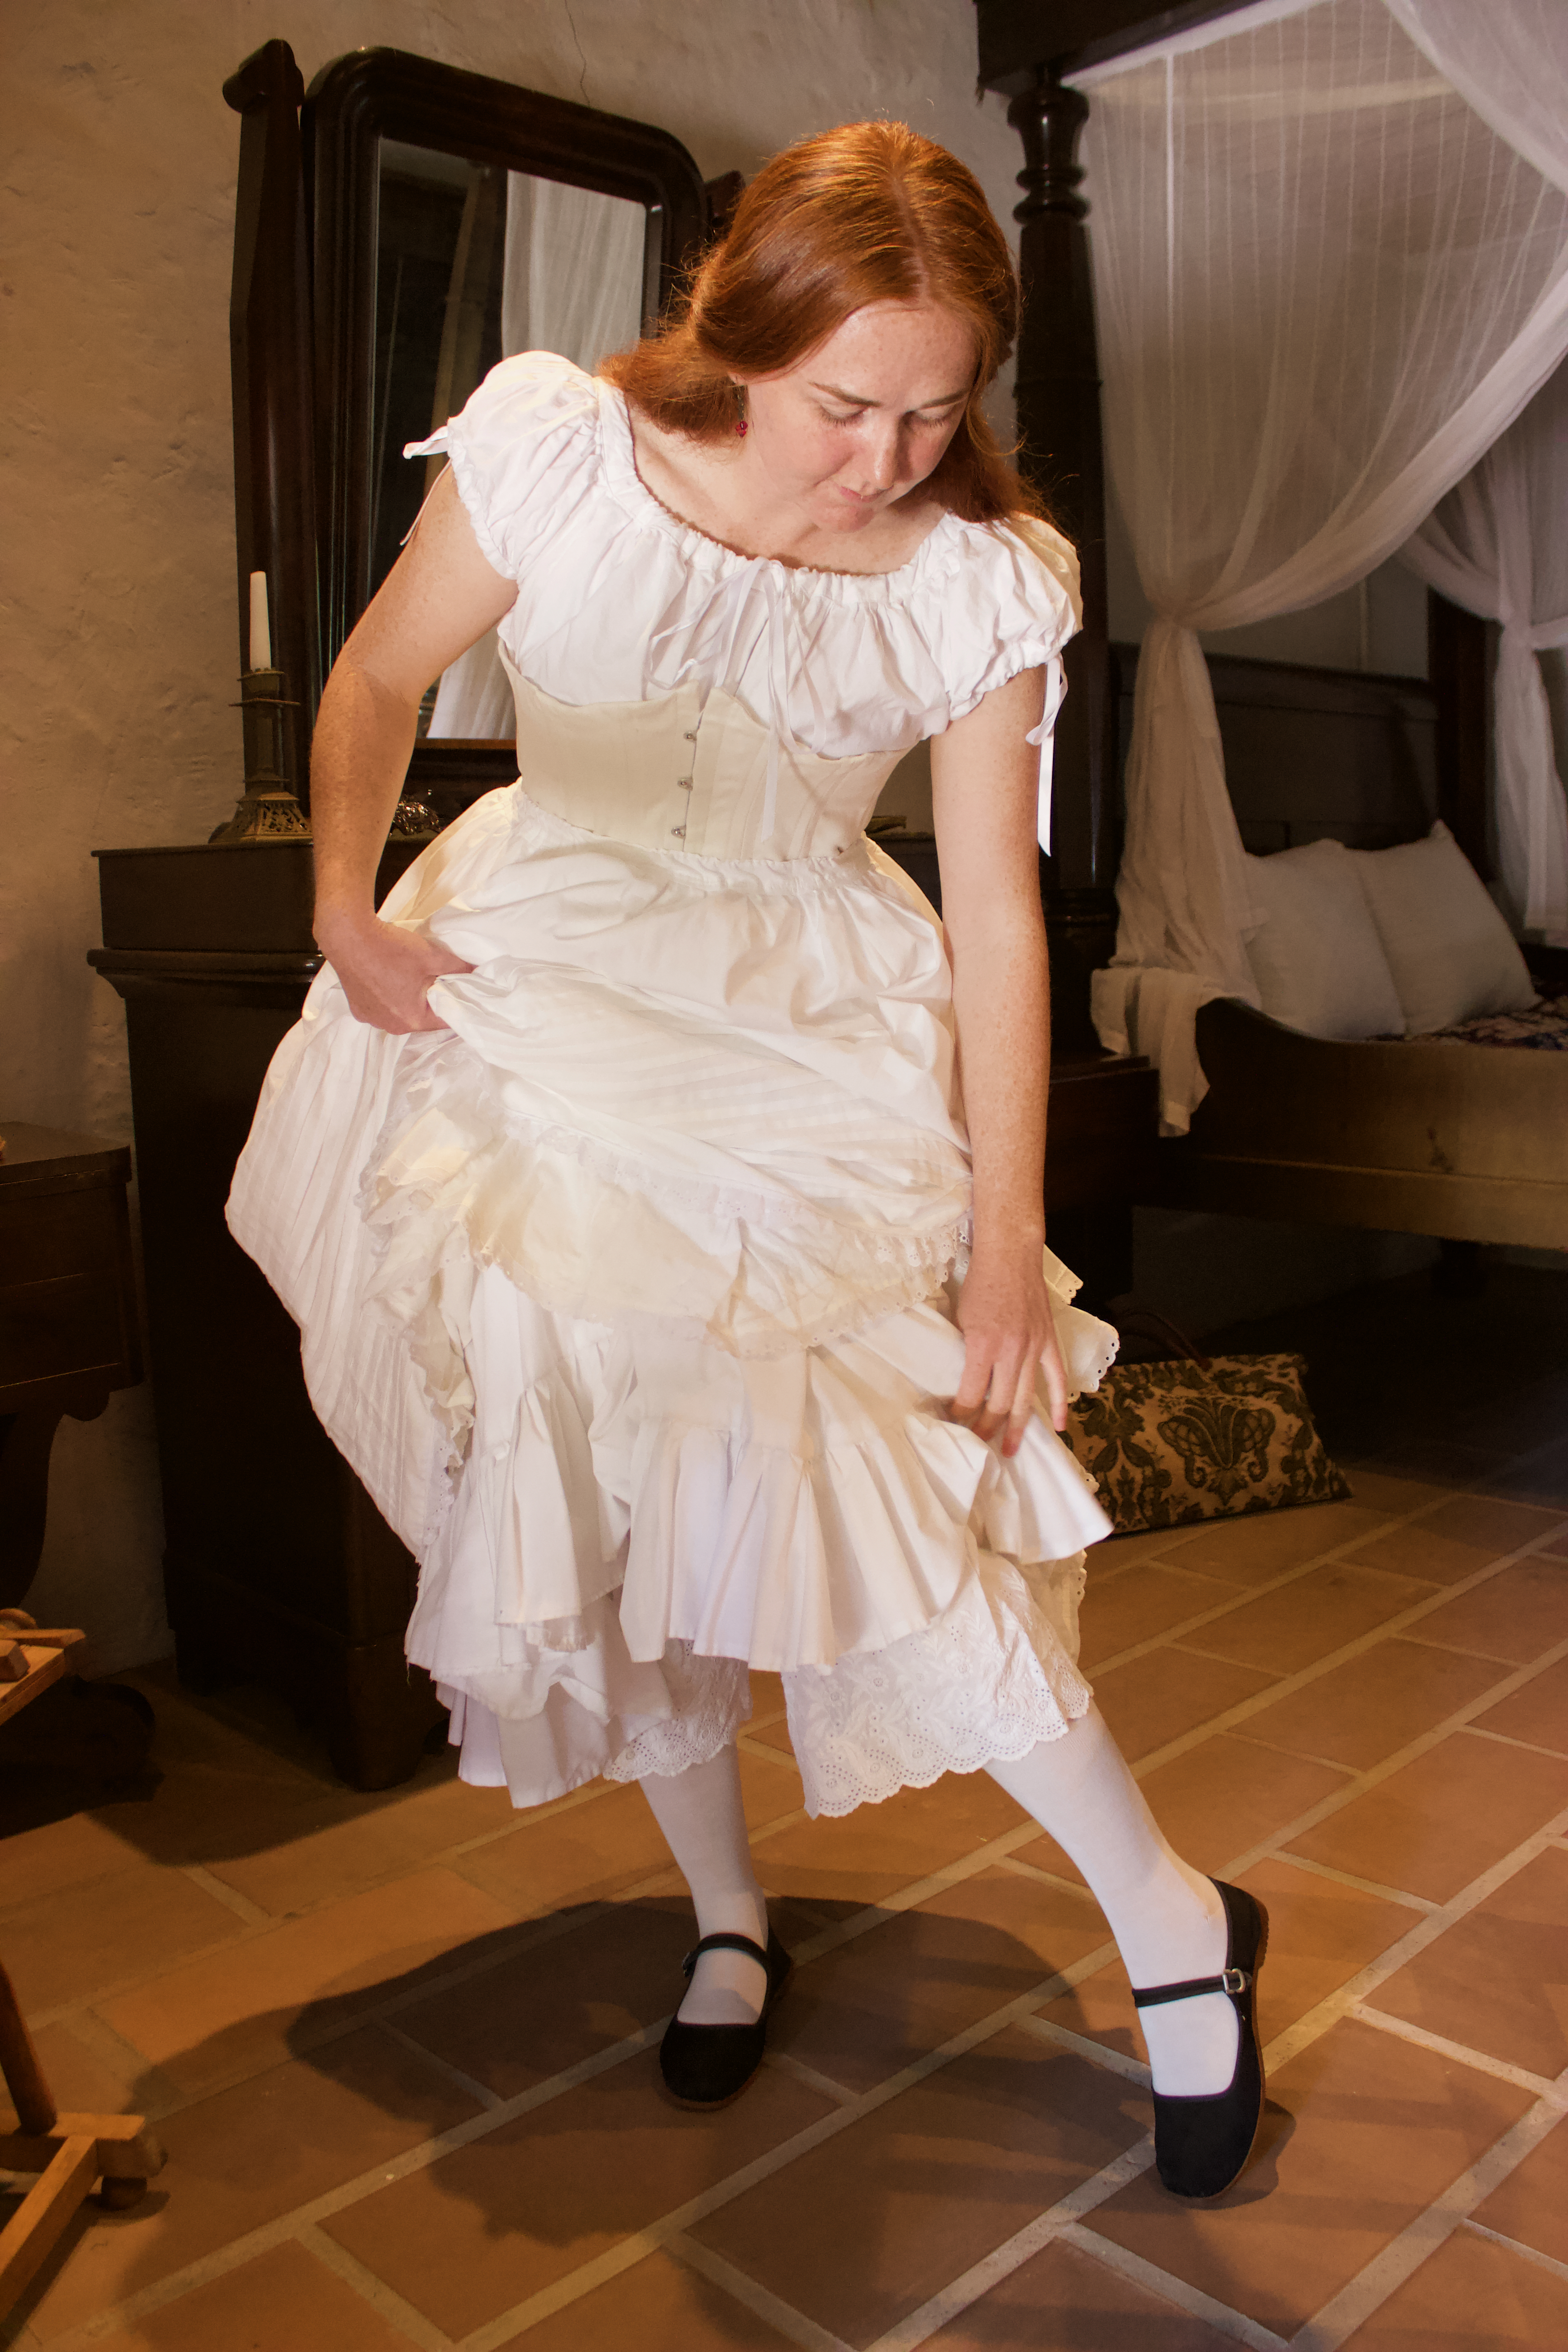 Photo of a woman in period undergarments holding up her petticoats to look at her shoes